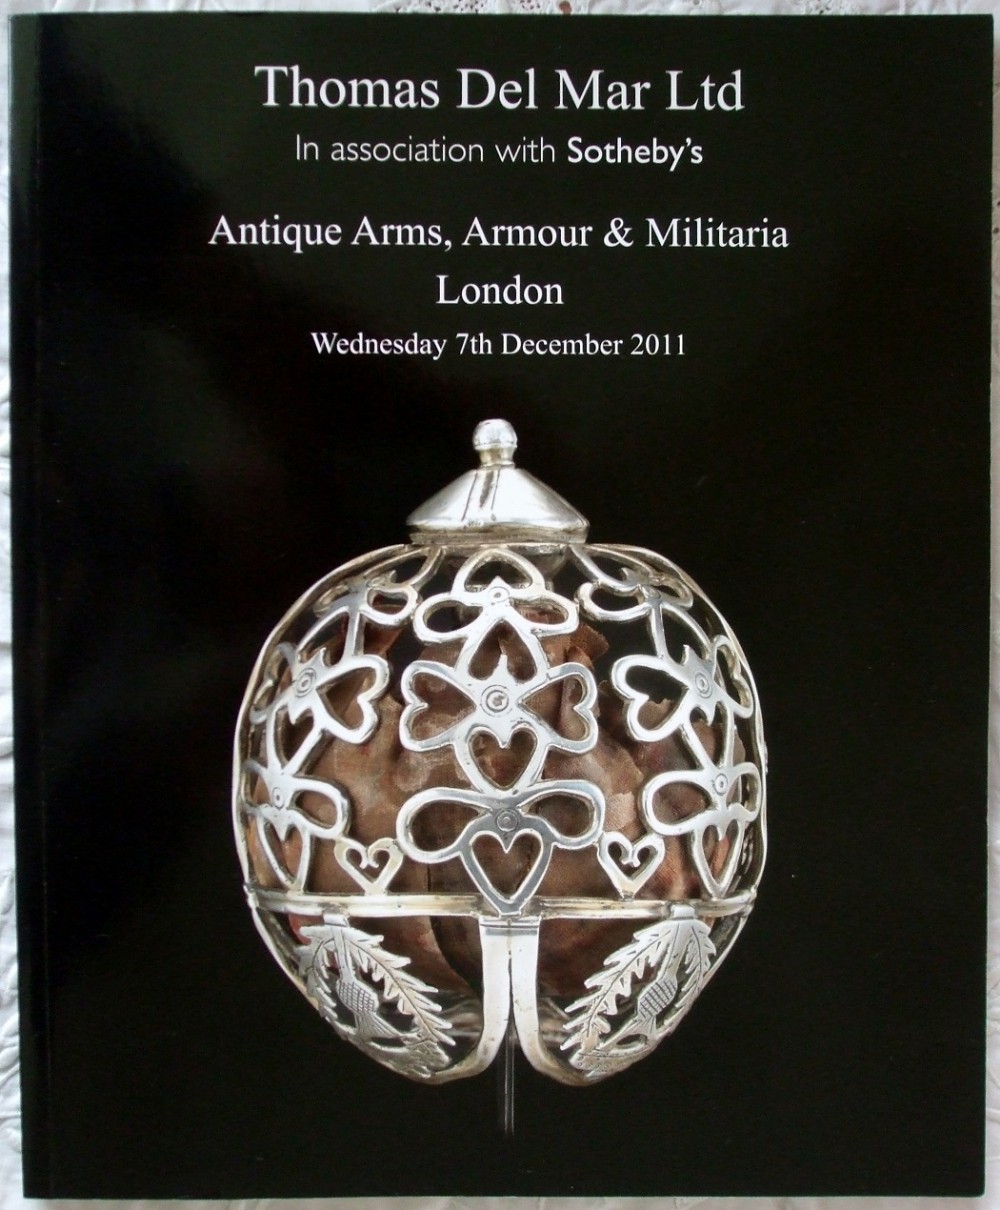 thomas del mar in association with sotheby's antique arms armour militaria london 07 12 2011